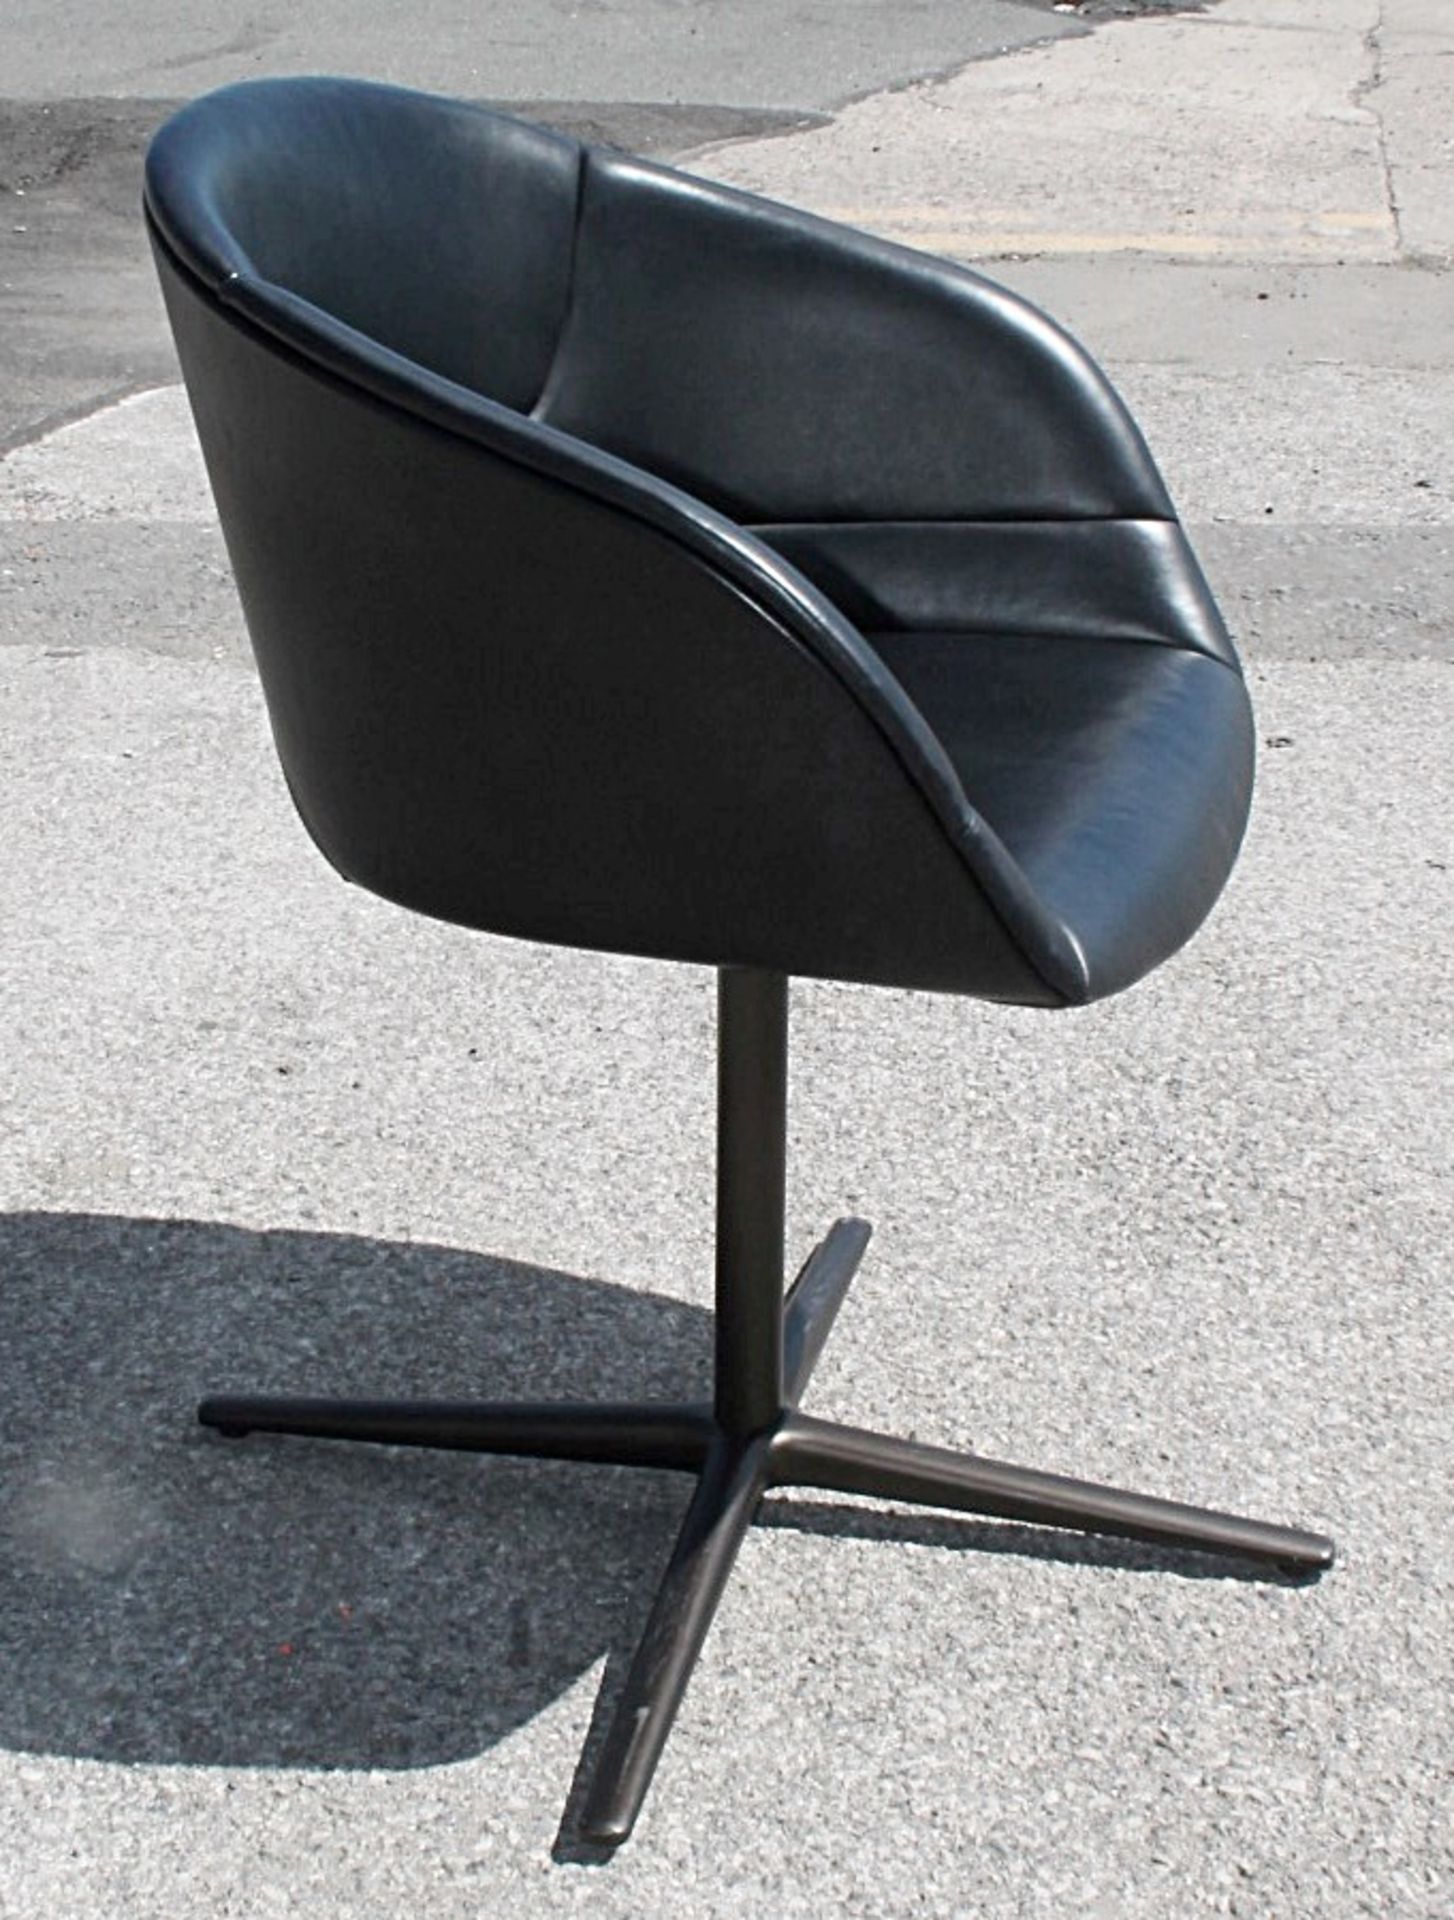 1 x WALTER KNOLL 'Kyo' Genuine Leather Upholstered Chair - Original RRP £1,979 - CL753 - Ref: - Image 5 of 6